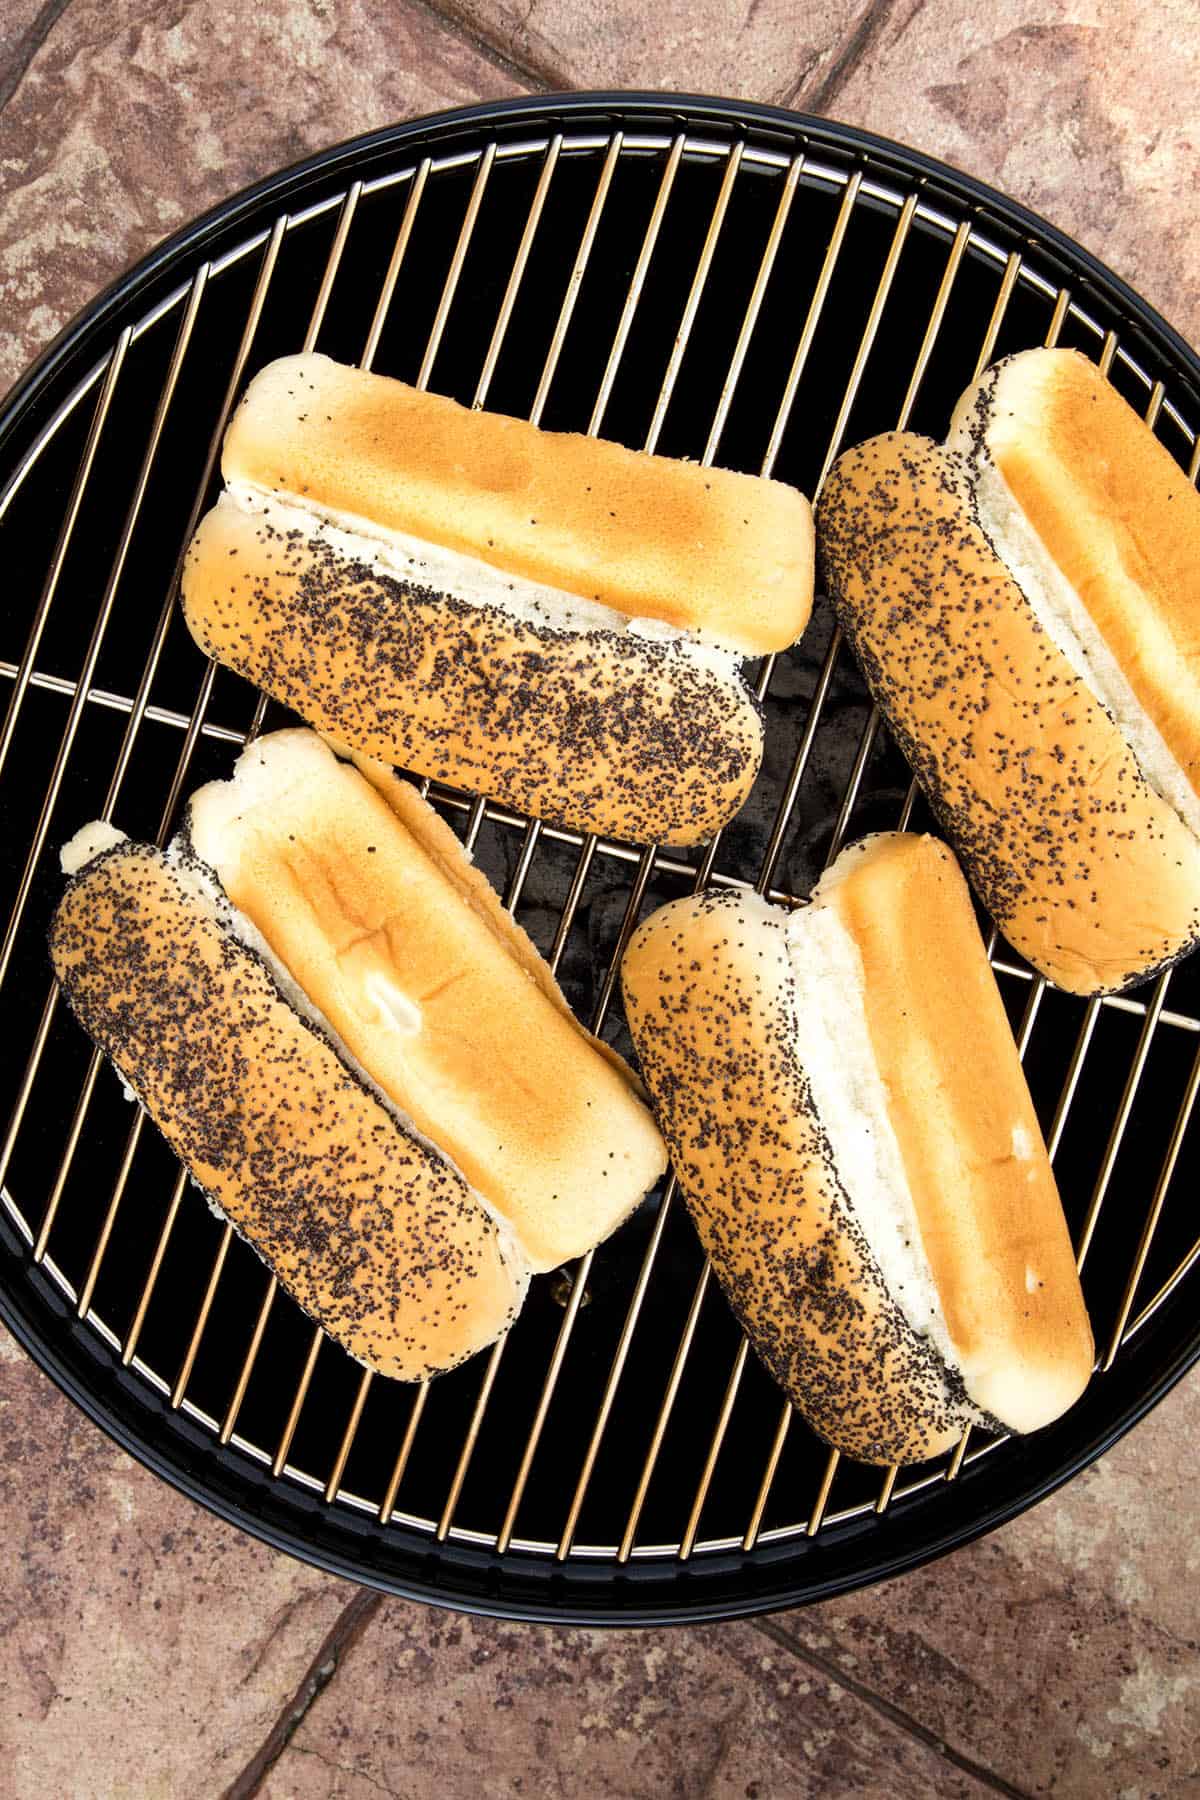 Poppy seed buns on the grill